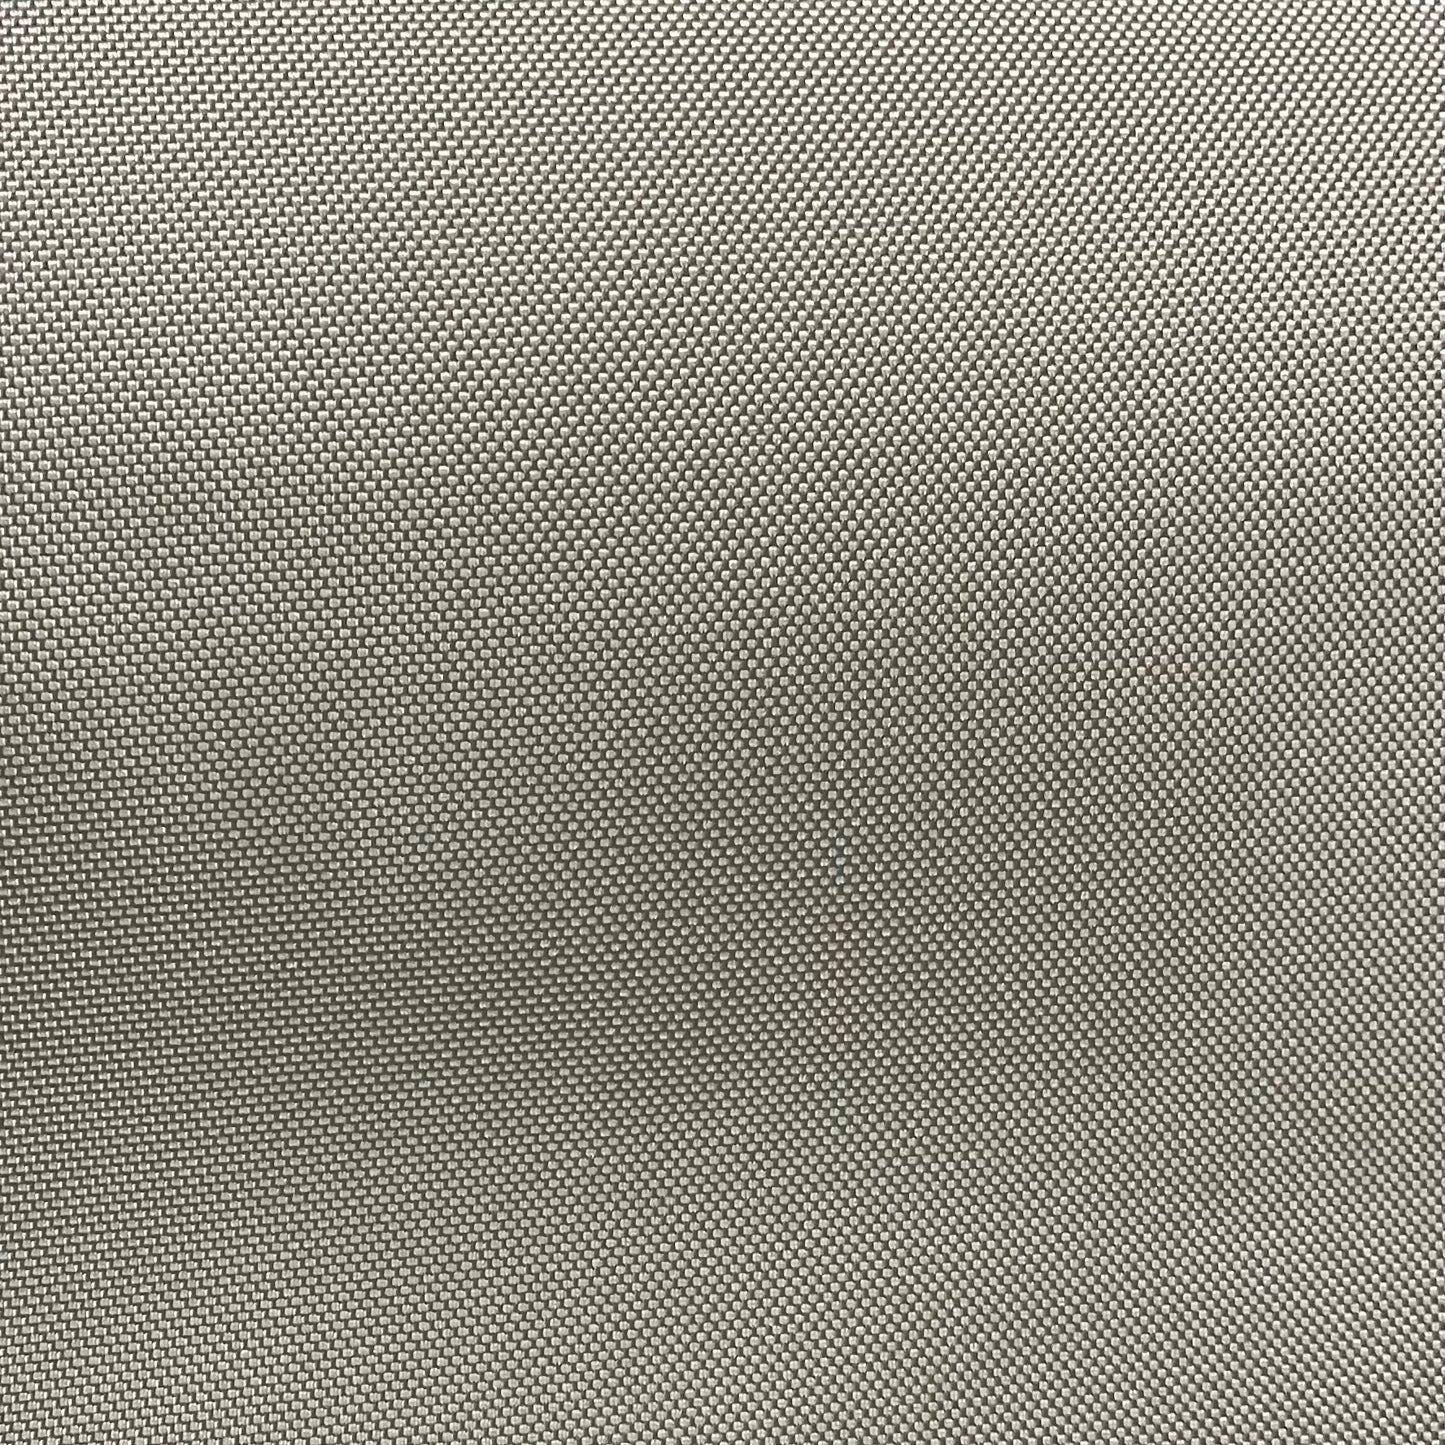 840 Denier Coated Ballistic Nylon Fabric with Durable Water Repellent Finish (Sold per Yard)